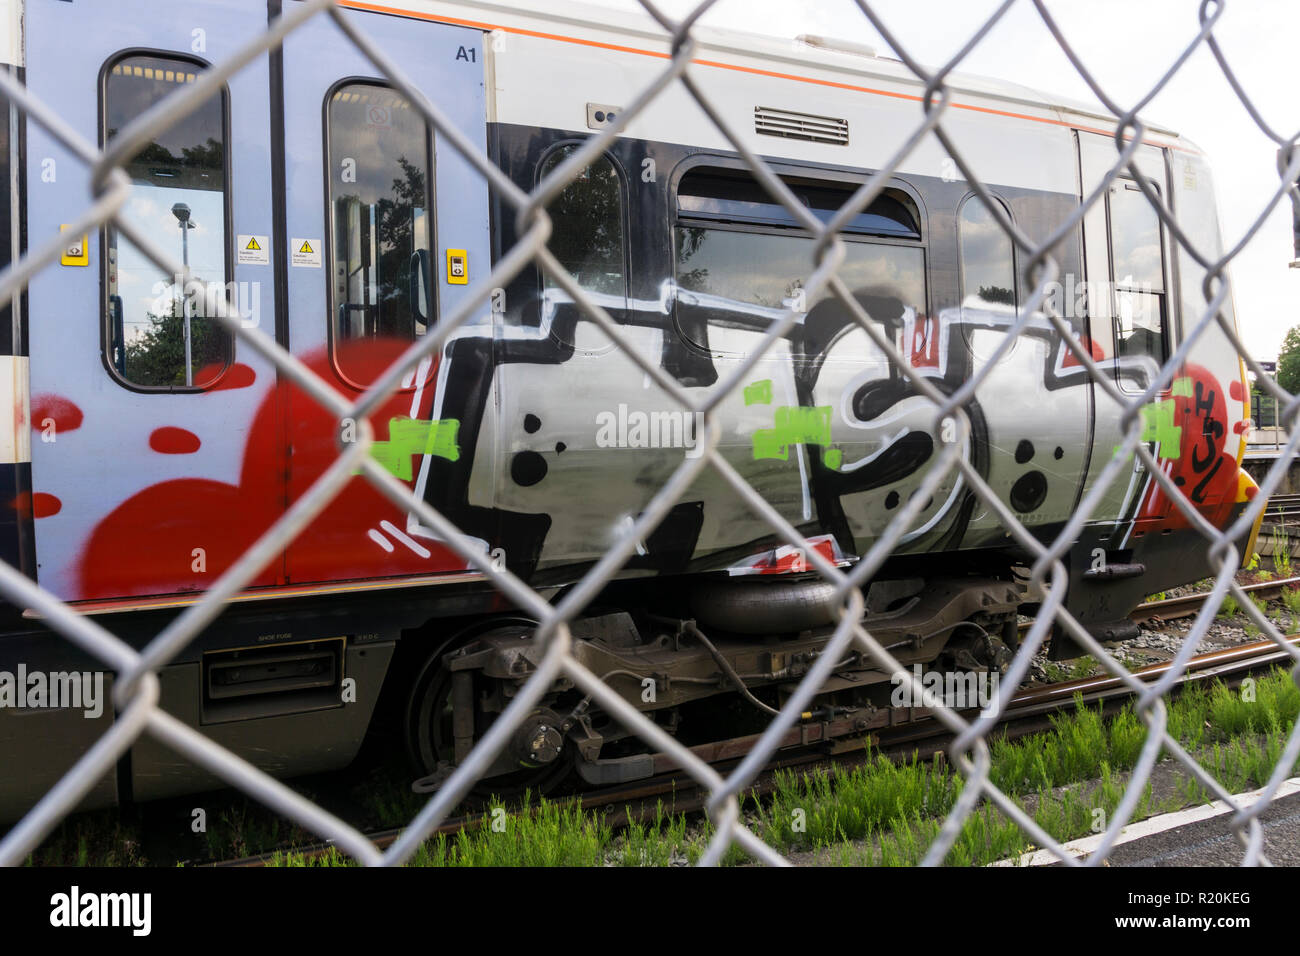 Train covered in graffiti seen through chain link fence. Stock Photo